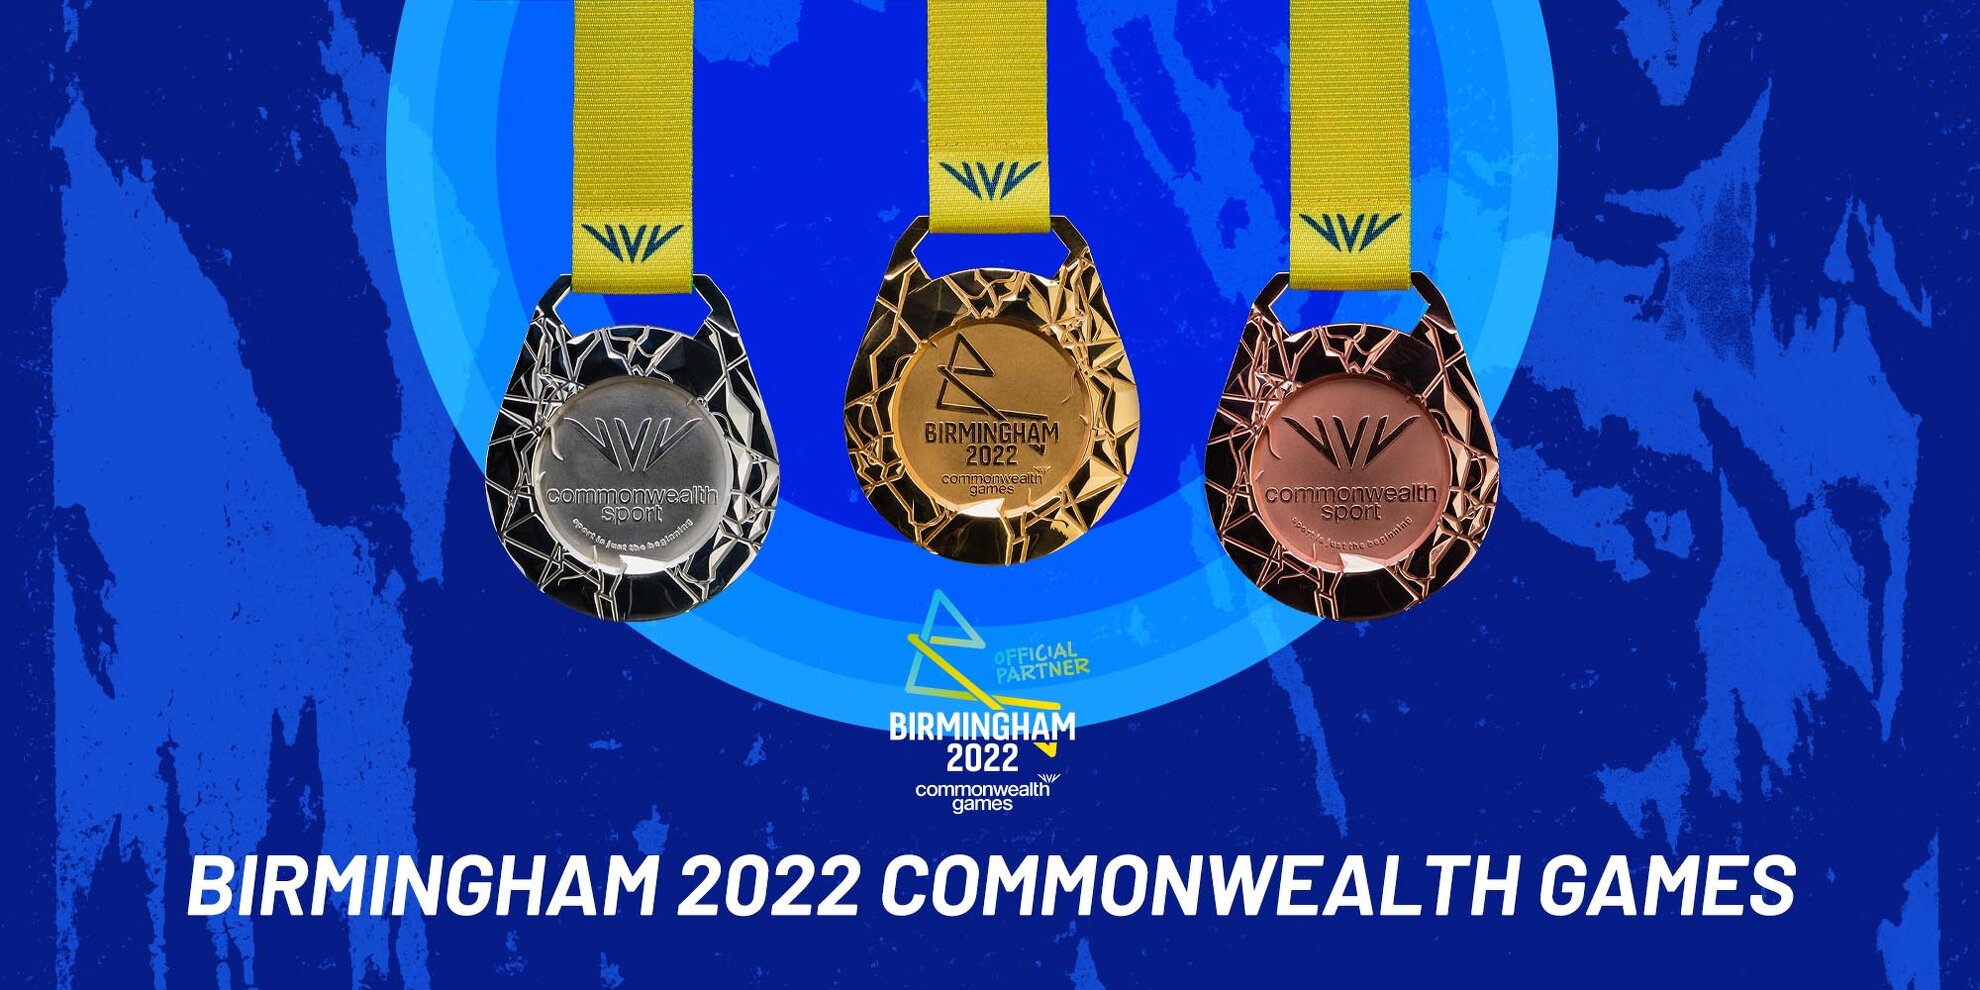 CWG- Commonwealth Games